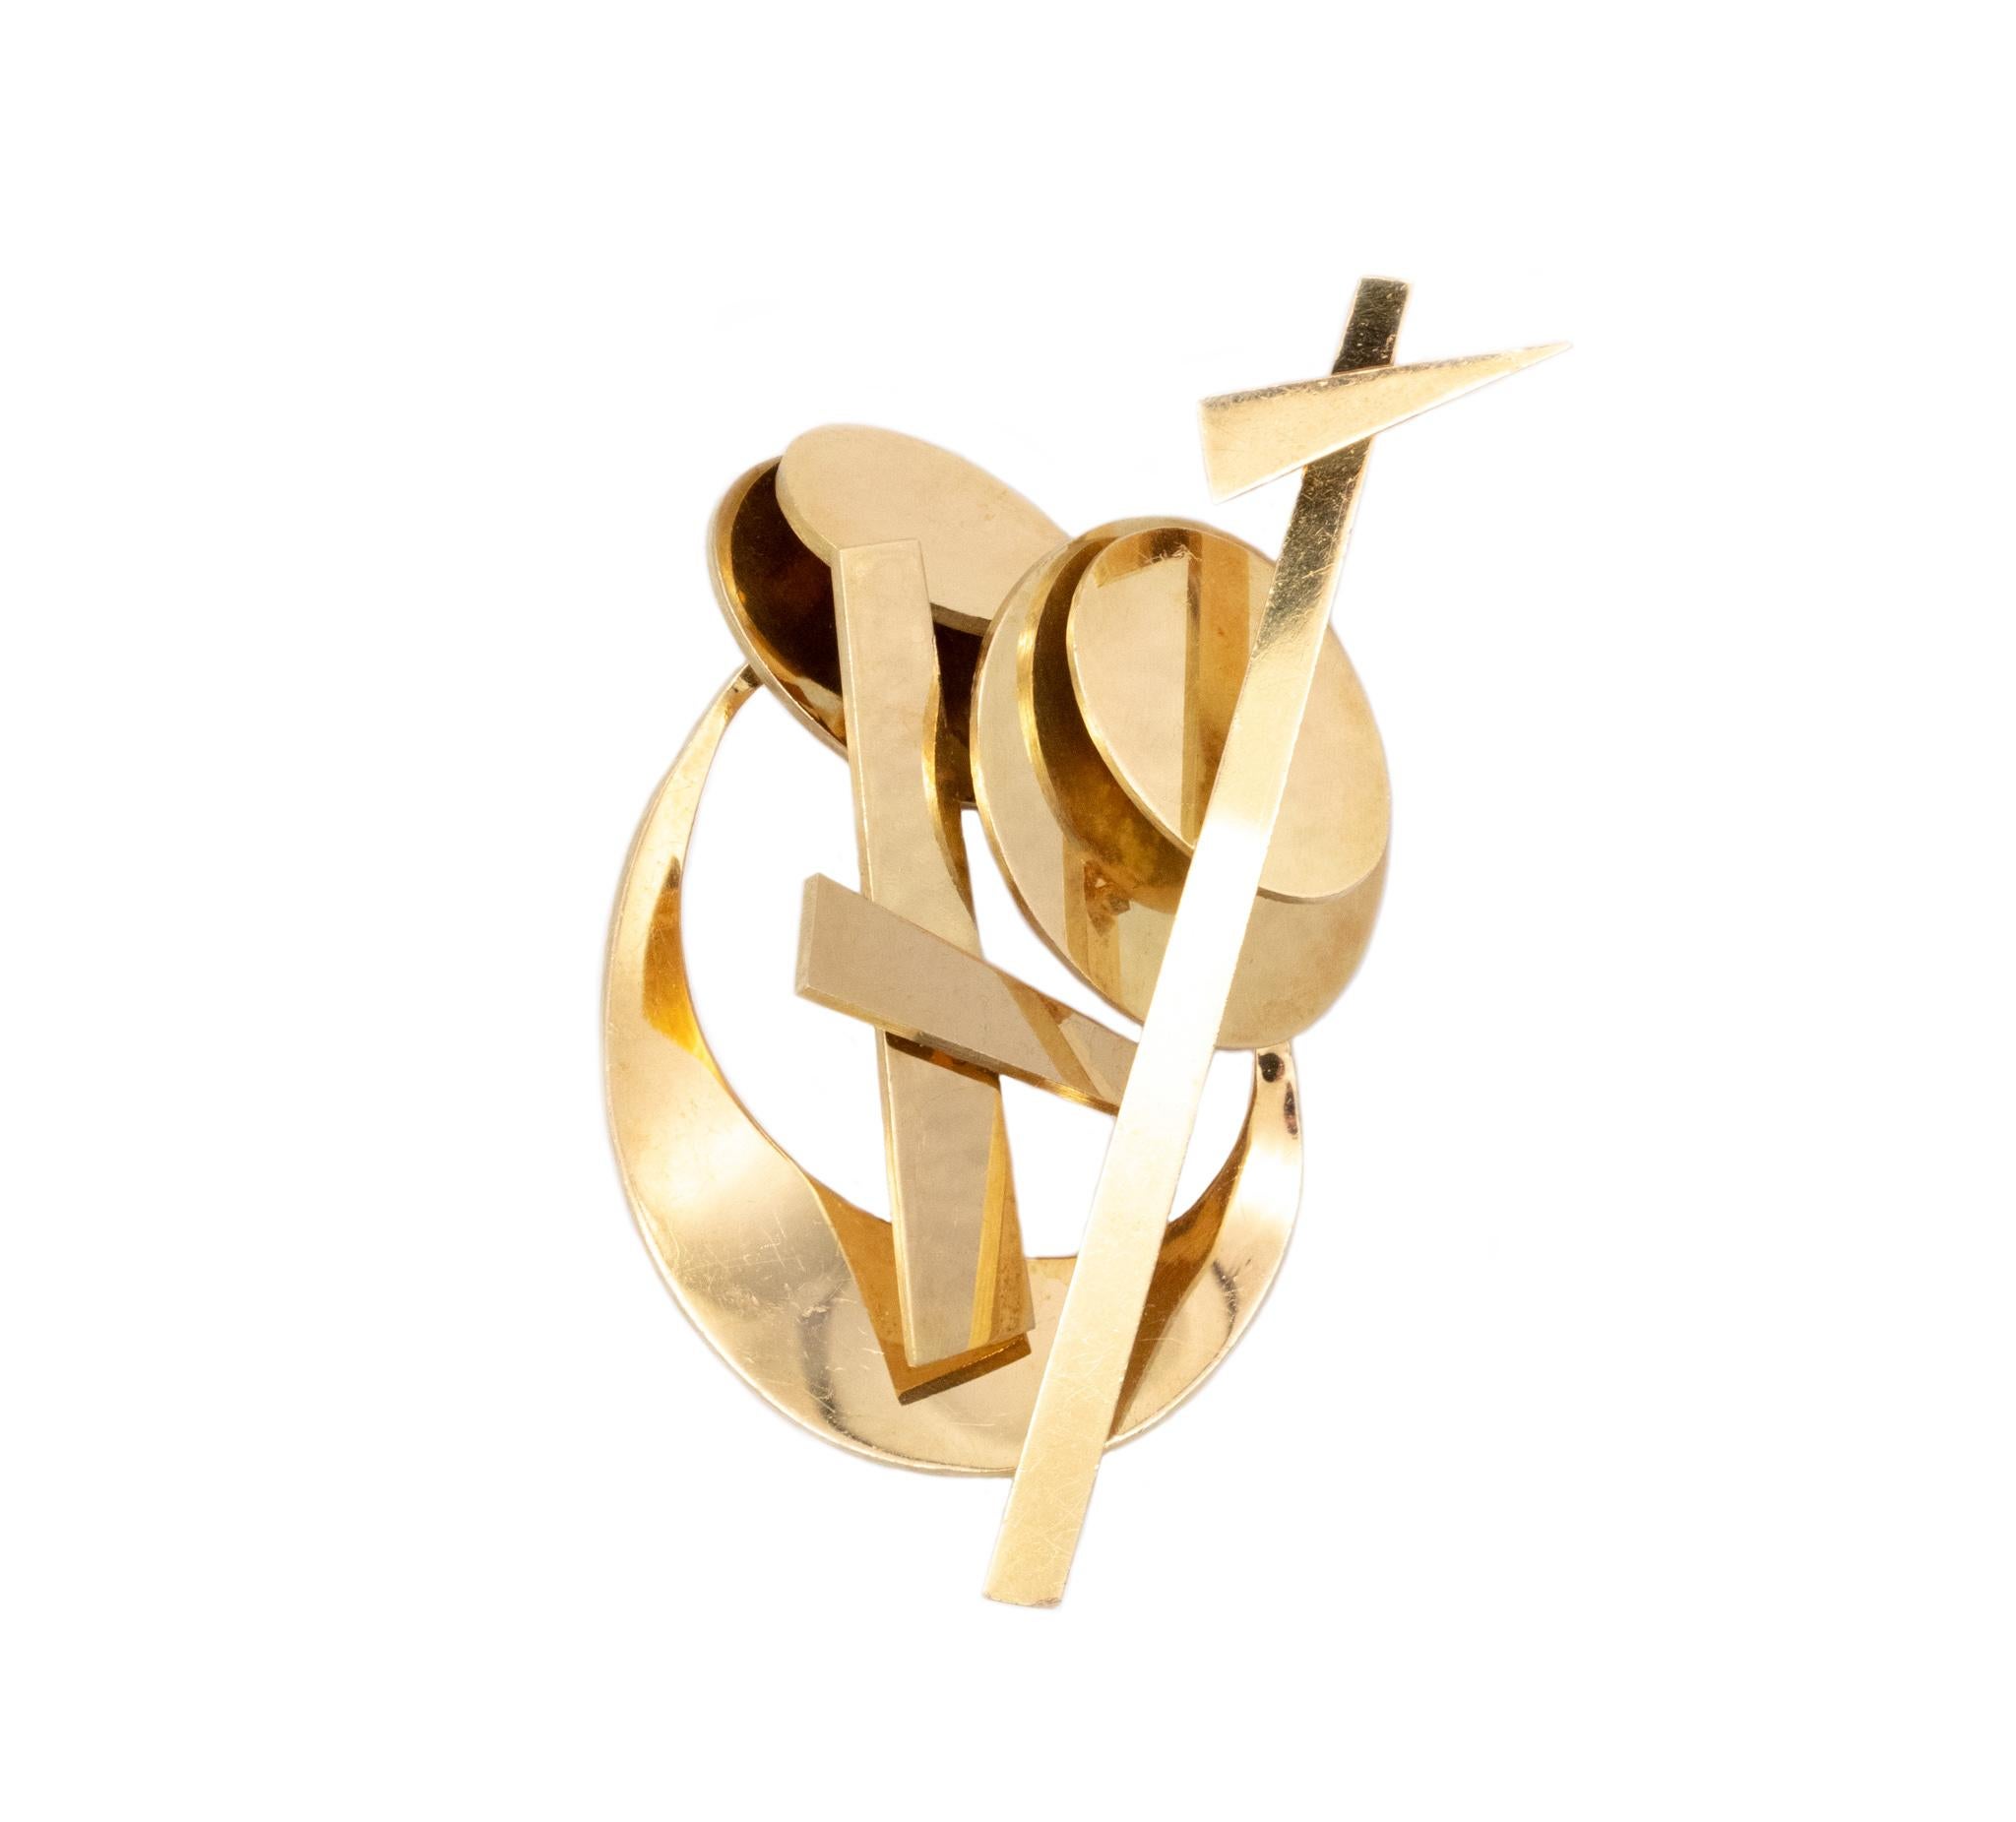 Rare pendant-brooch designed by Nadia Leger (1904-1982).

A vintage geometric constructivism piece, created by Nadia Leger in Paris France, circa 1960. This sculptural piece was crafted in solid 18 karats of high polished yellow gold. Totally